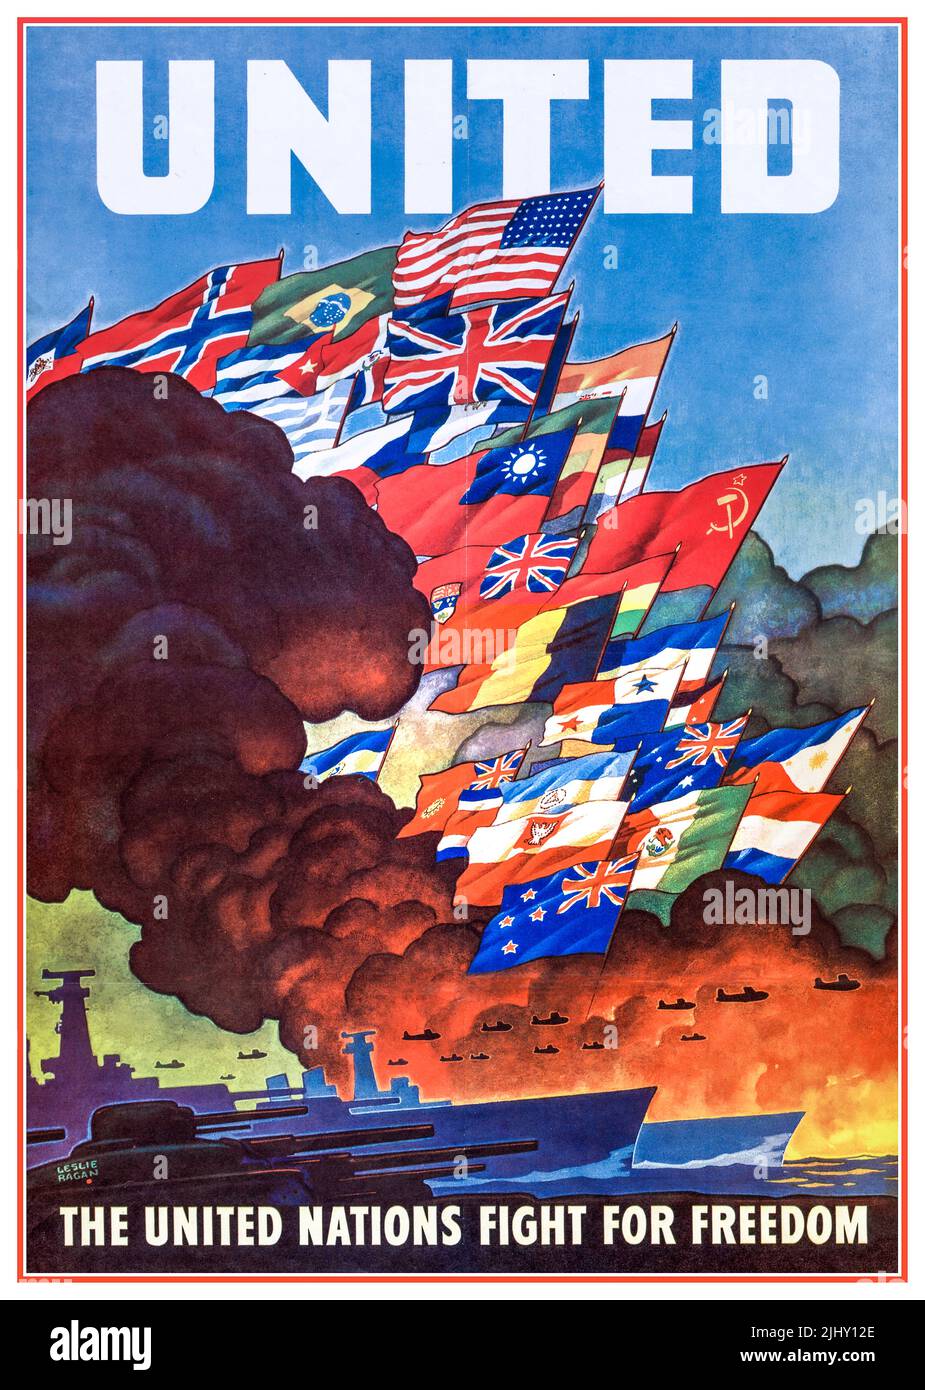 Vintage WW2 ' UNITED'  'UNITED NATIONS FIGHT FOR FREEDOM' Propaganda Poster WW2 created during the Second World War (1943), according to the Declaration of the United Nations of 1942. The Poster, created by United States Office of War Information and made by United States Government Printing Office. The poster features the flags of those countries or governments-in-exile that pledged to support the Allied effort.This poster is important because it represents the very origins of the United Nations as a wartime alliance, before it became an official post war entity Stock Photo